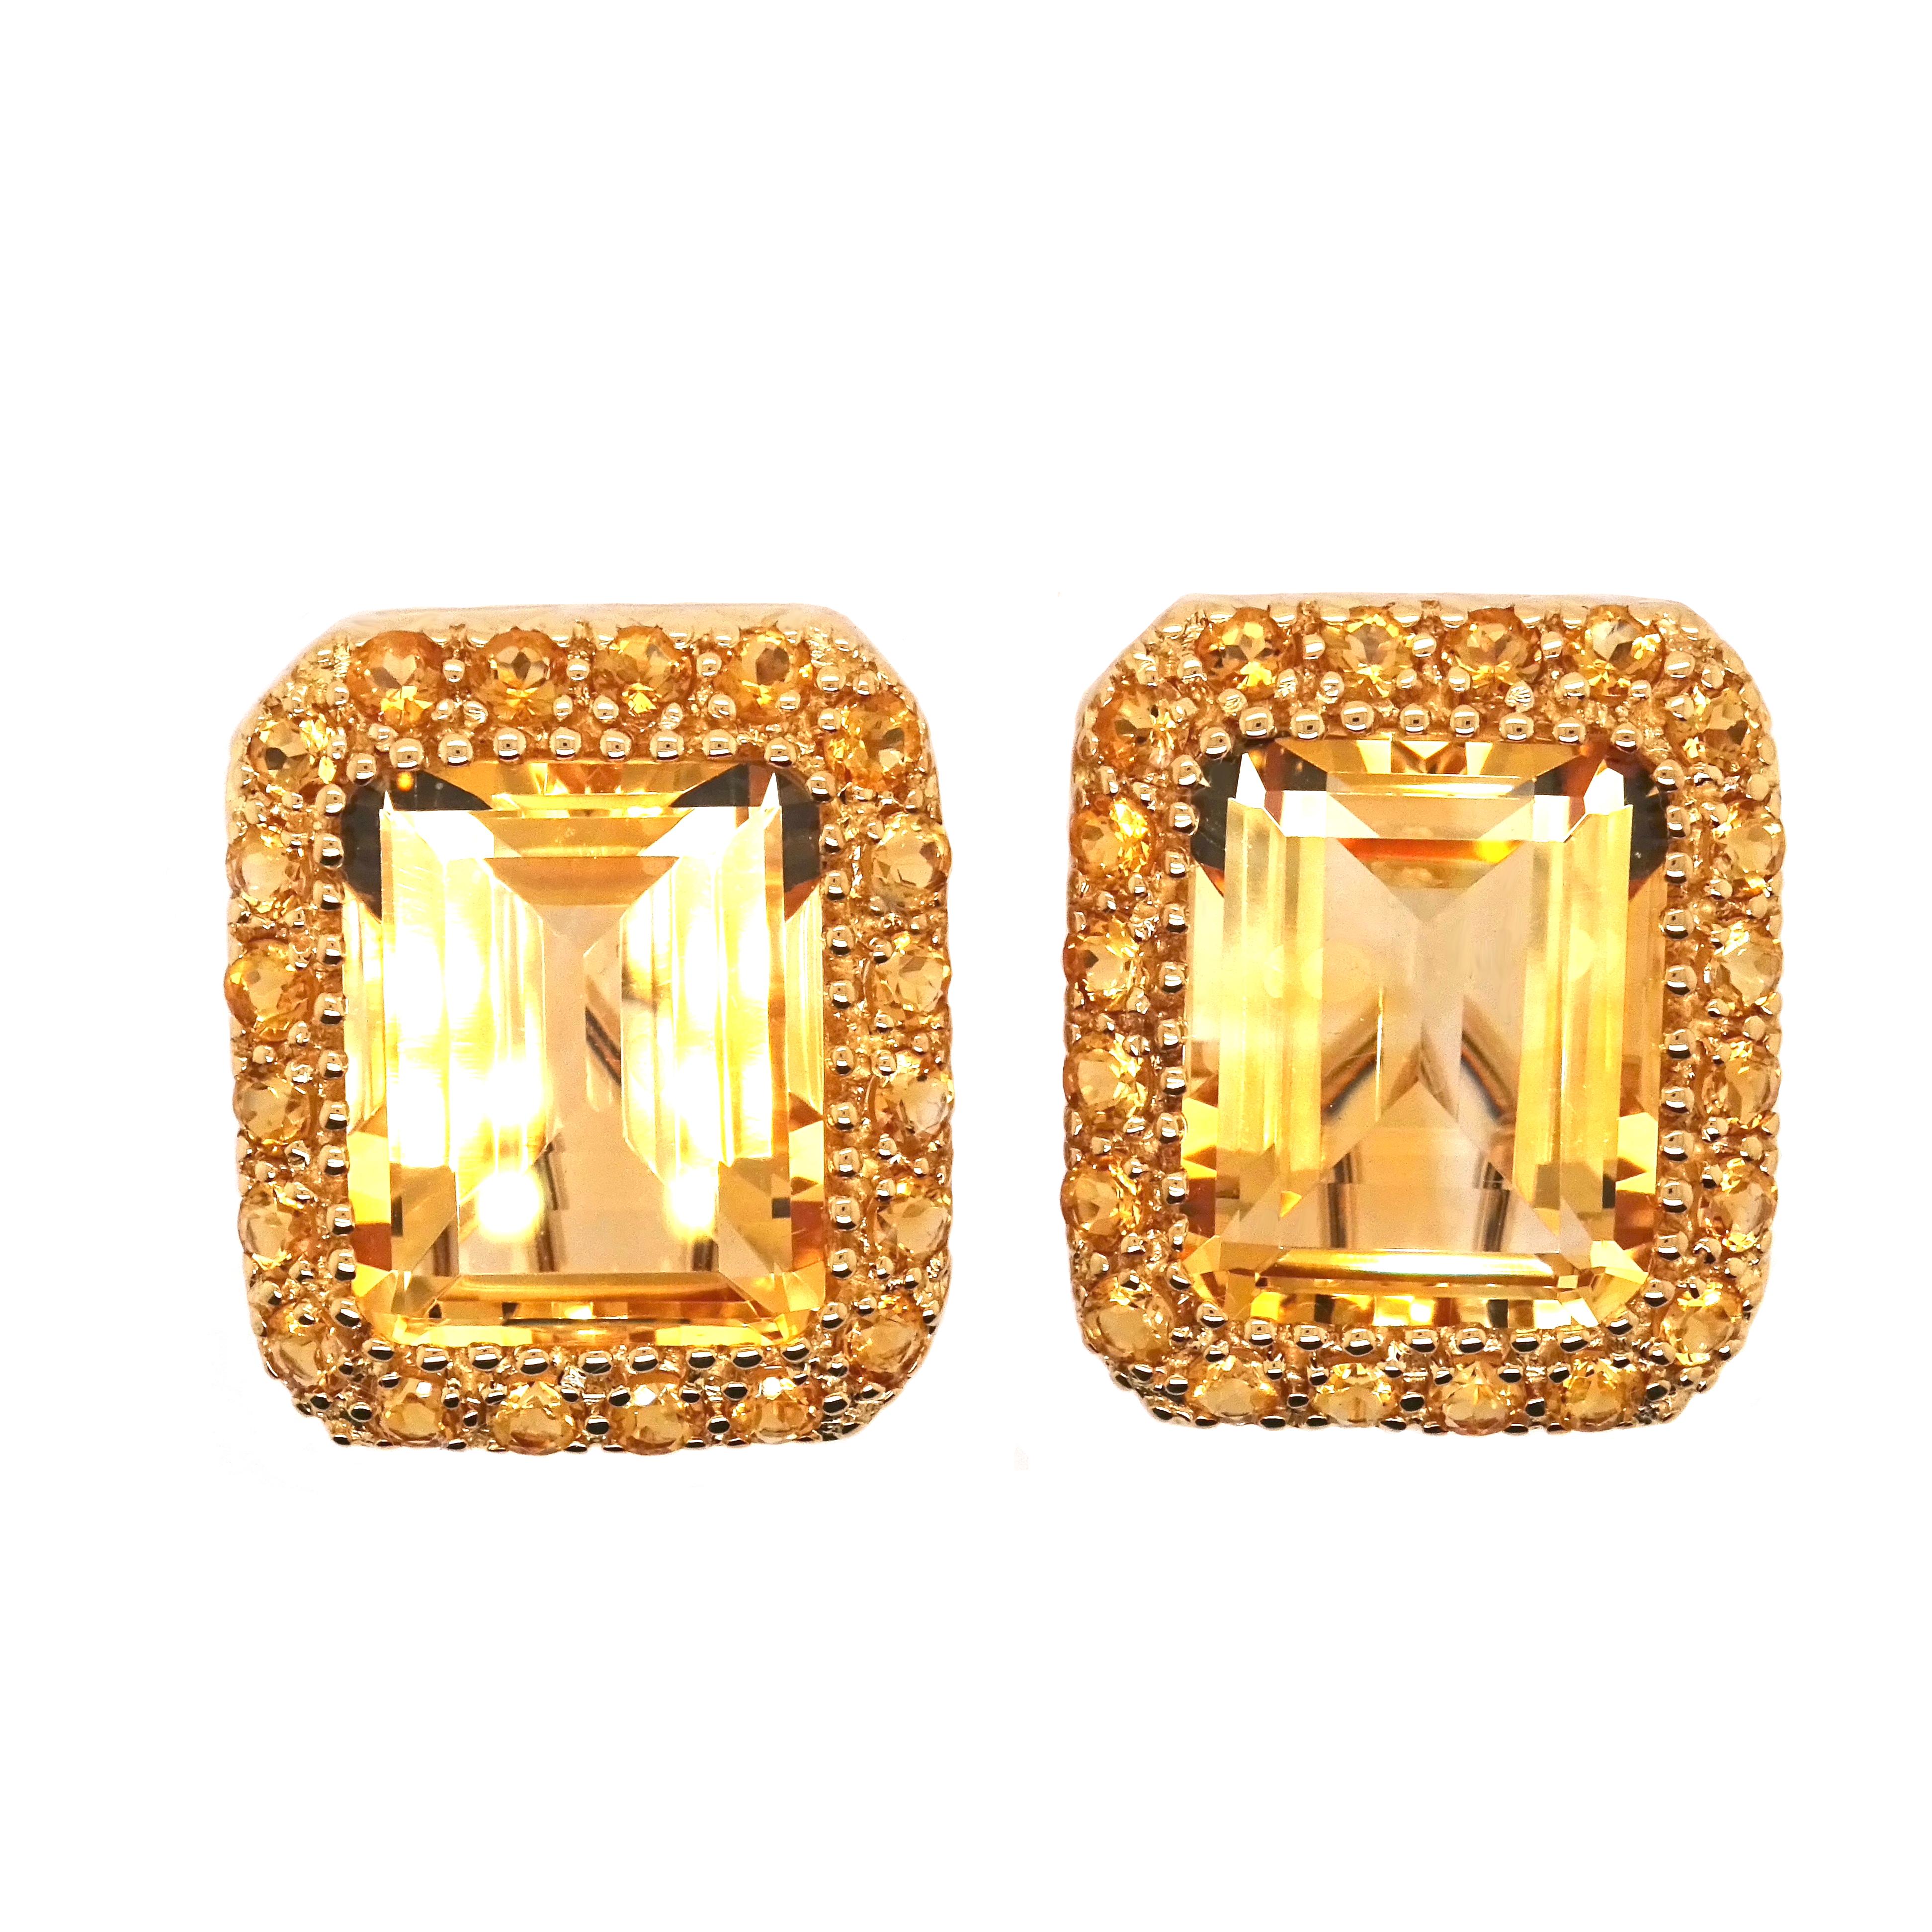 Step into the realm of luxury with our breathtaking 18K yellow gold earrings, featuring a dazzling combination of accent and central citrines in an elegant octagon shape. The sumptuous citrines, with a total carat weight of 24.34, steal the